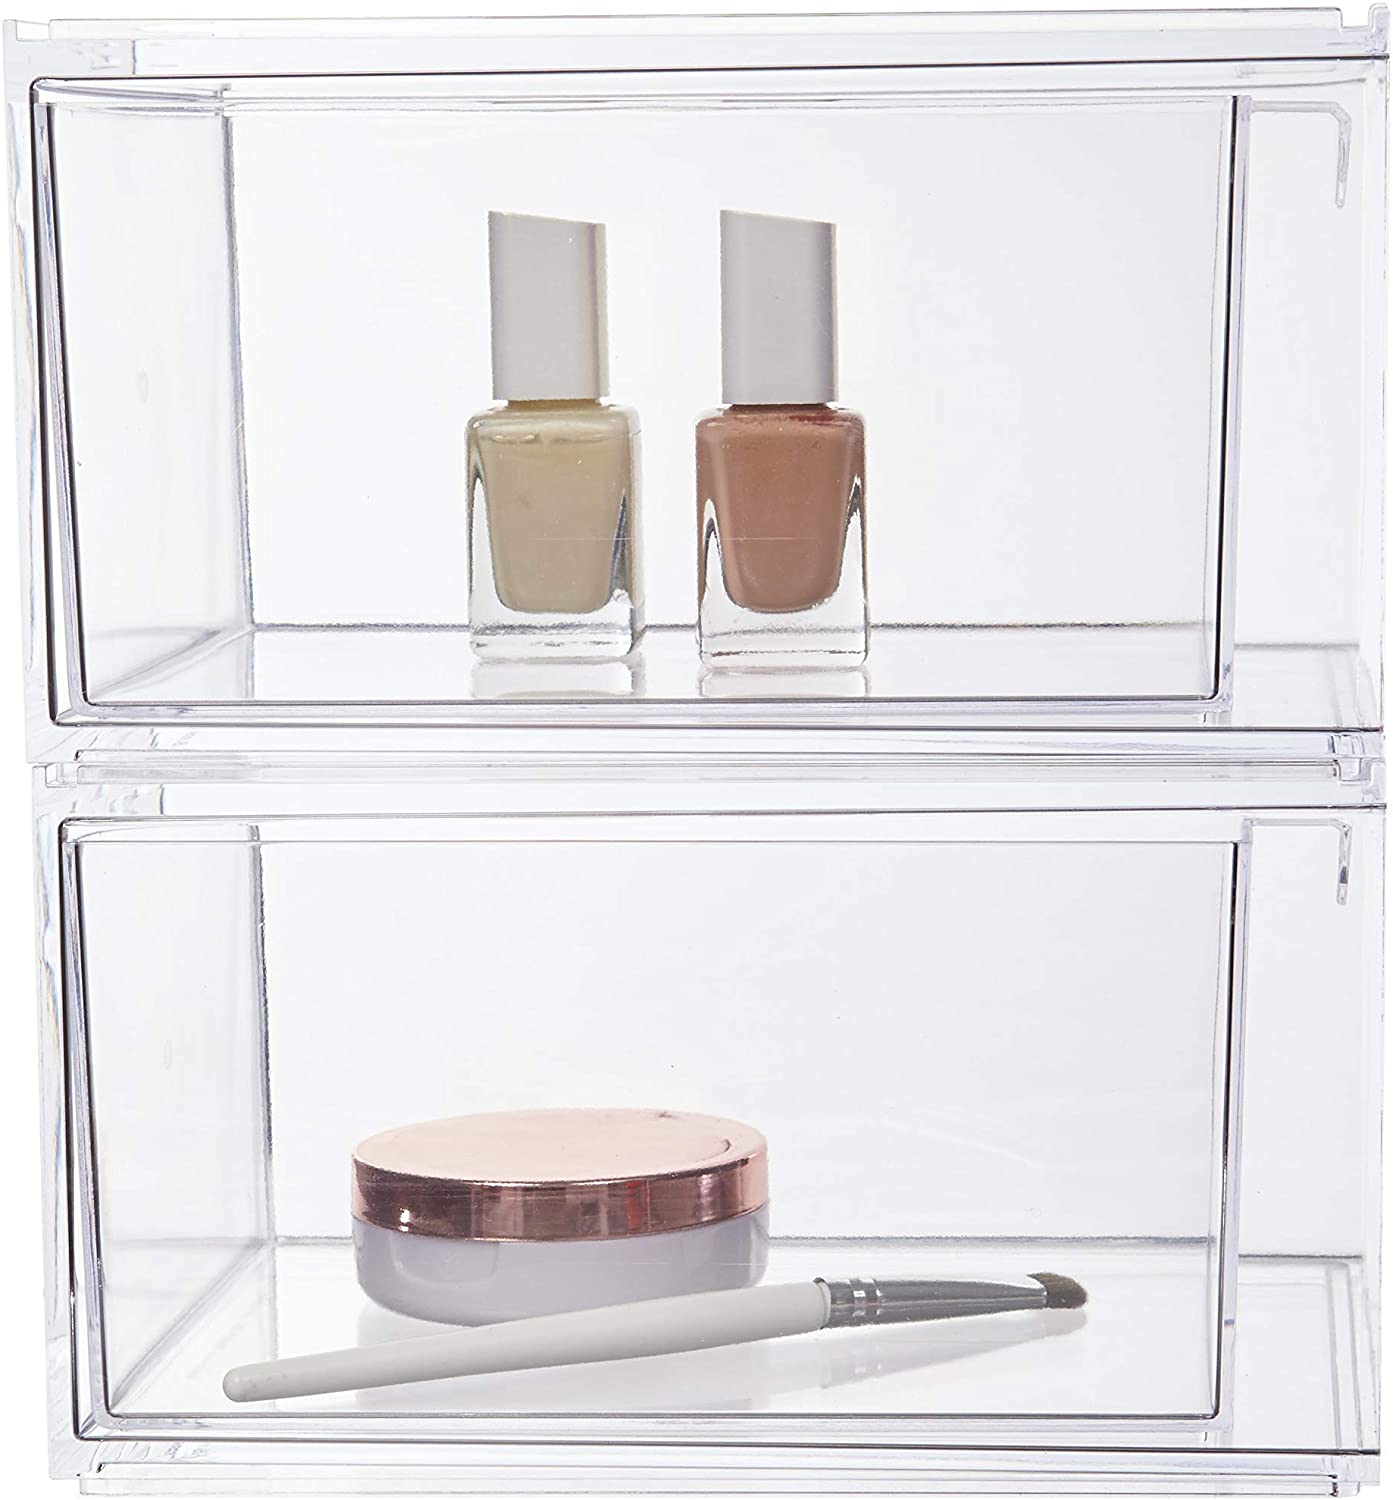 Stackable Cosmetic Organizer Drawers